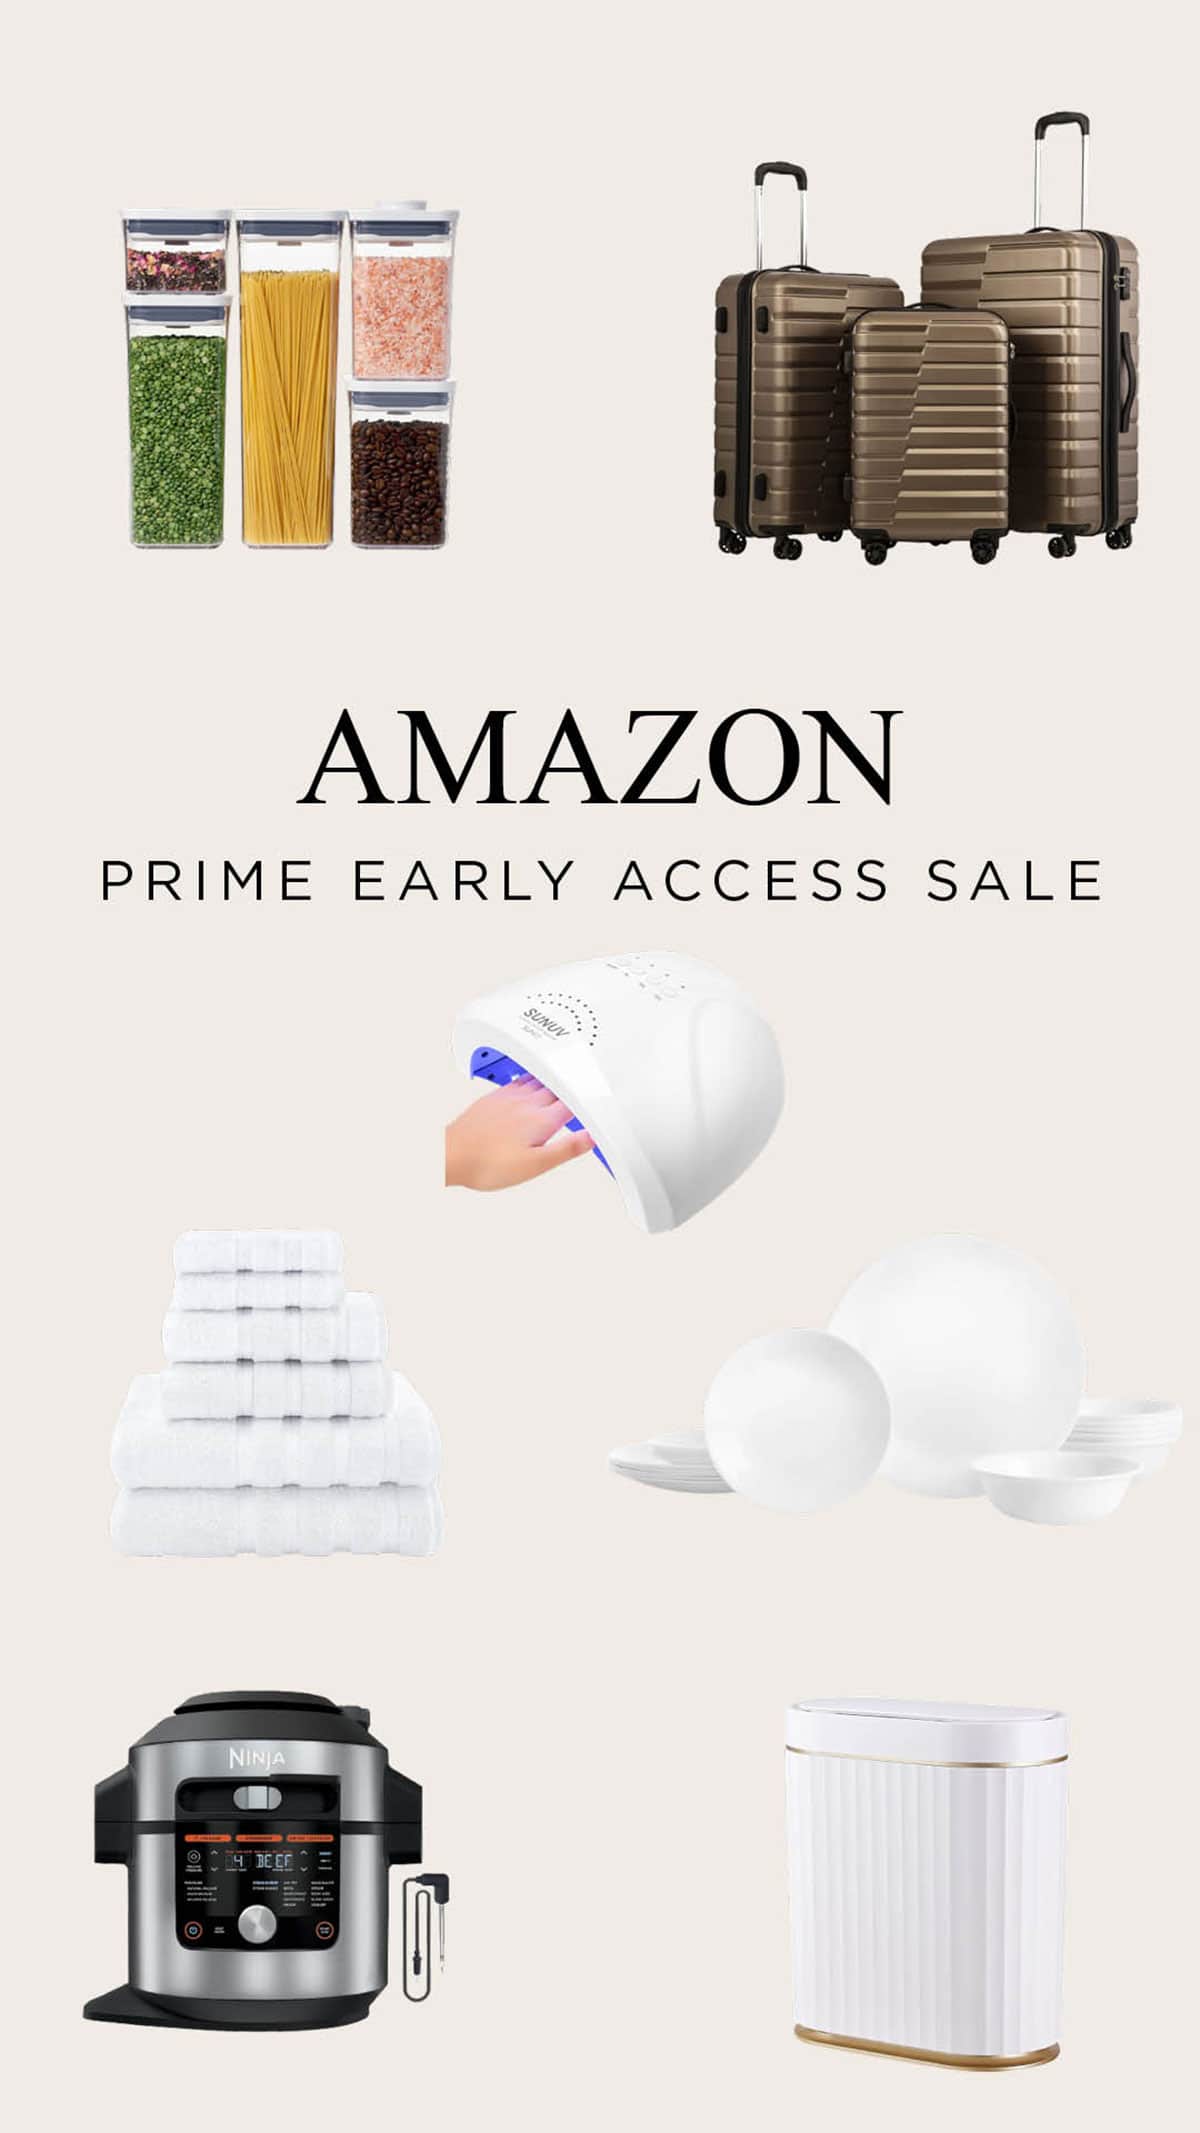 Amazon Prime Early Access Sale best items for the home